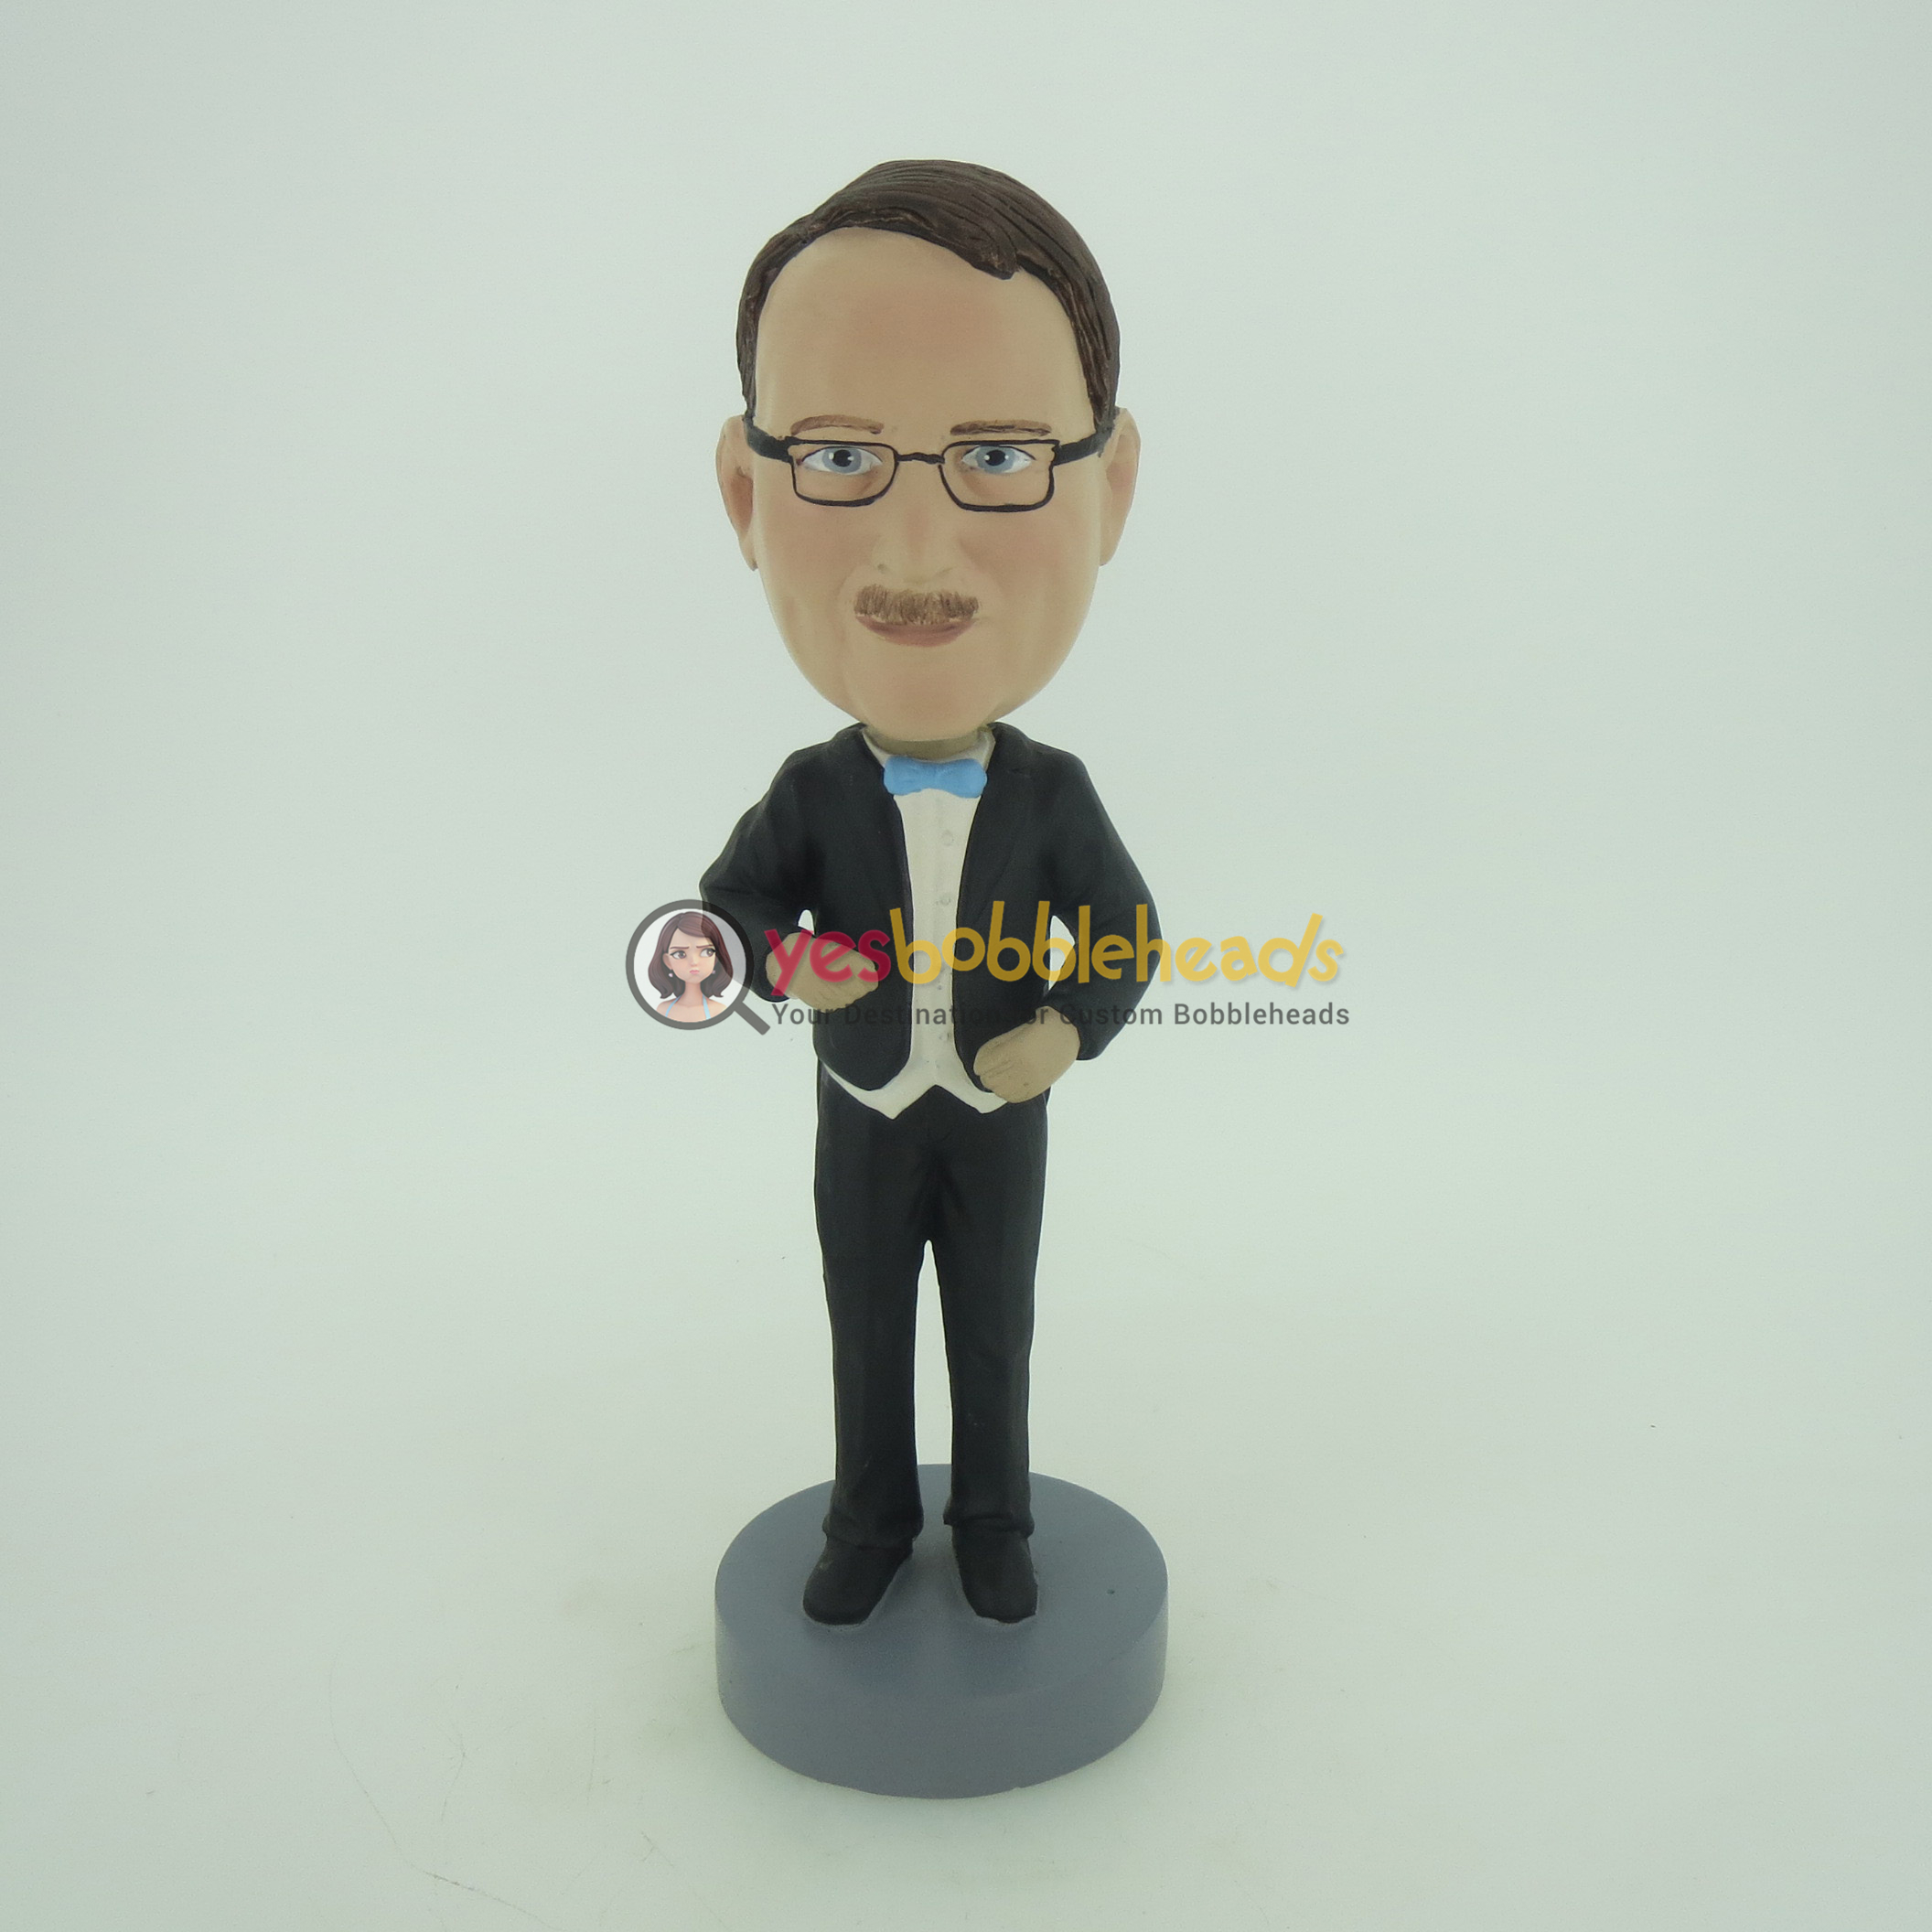 Picture of Custom Bobblehead Doll: Man In Black Suit With Blue Bow